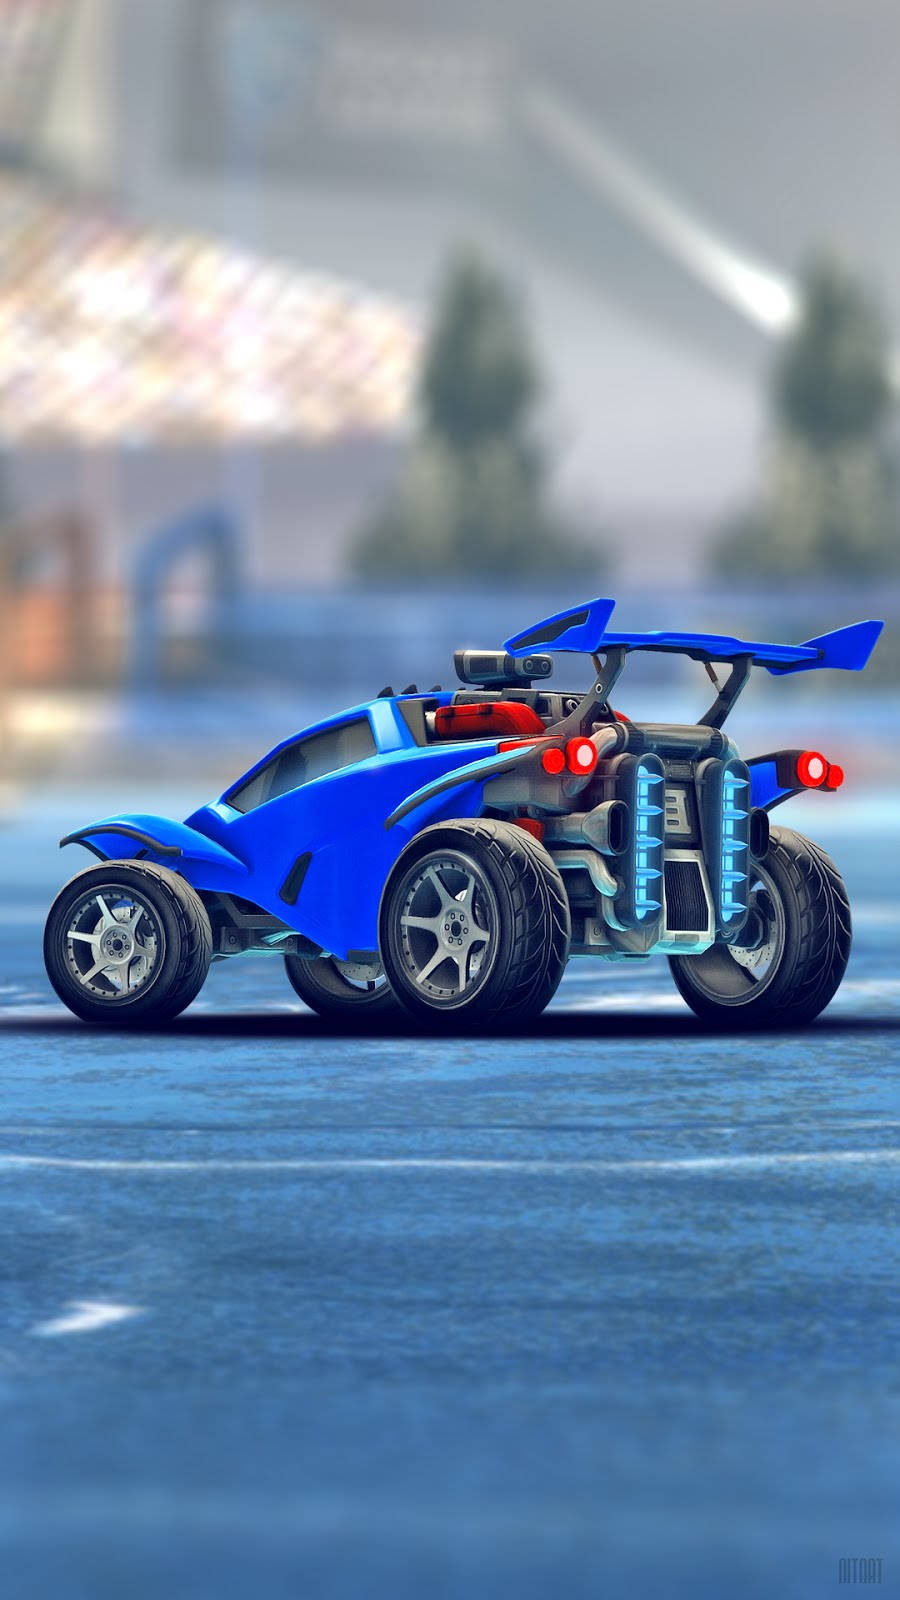 Get Ready To Compete With The Legendary Rocket League Phone Background